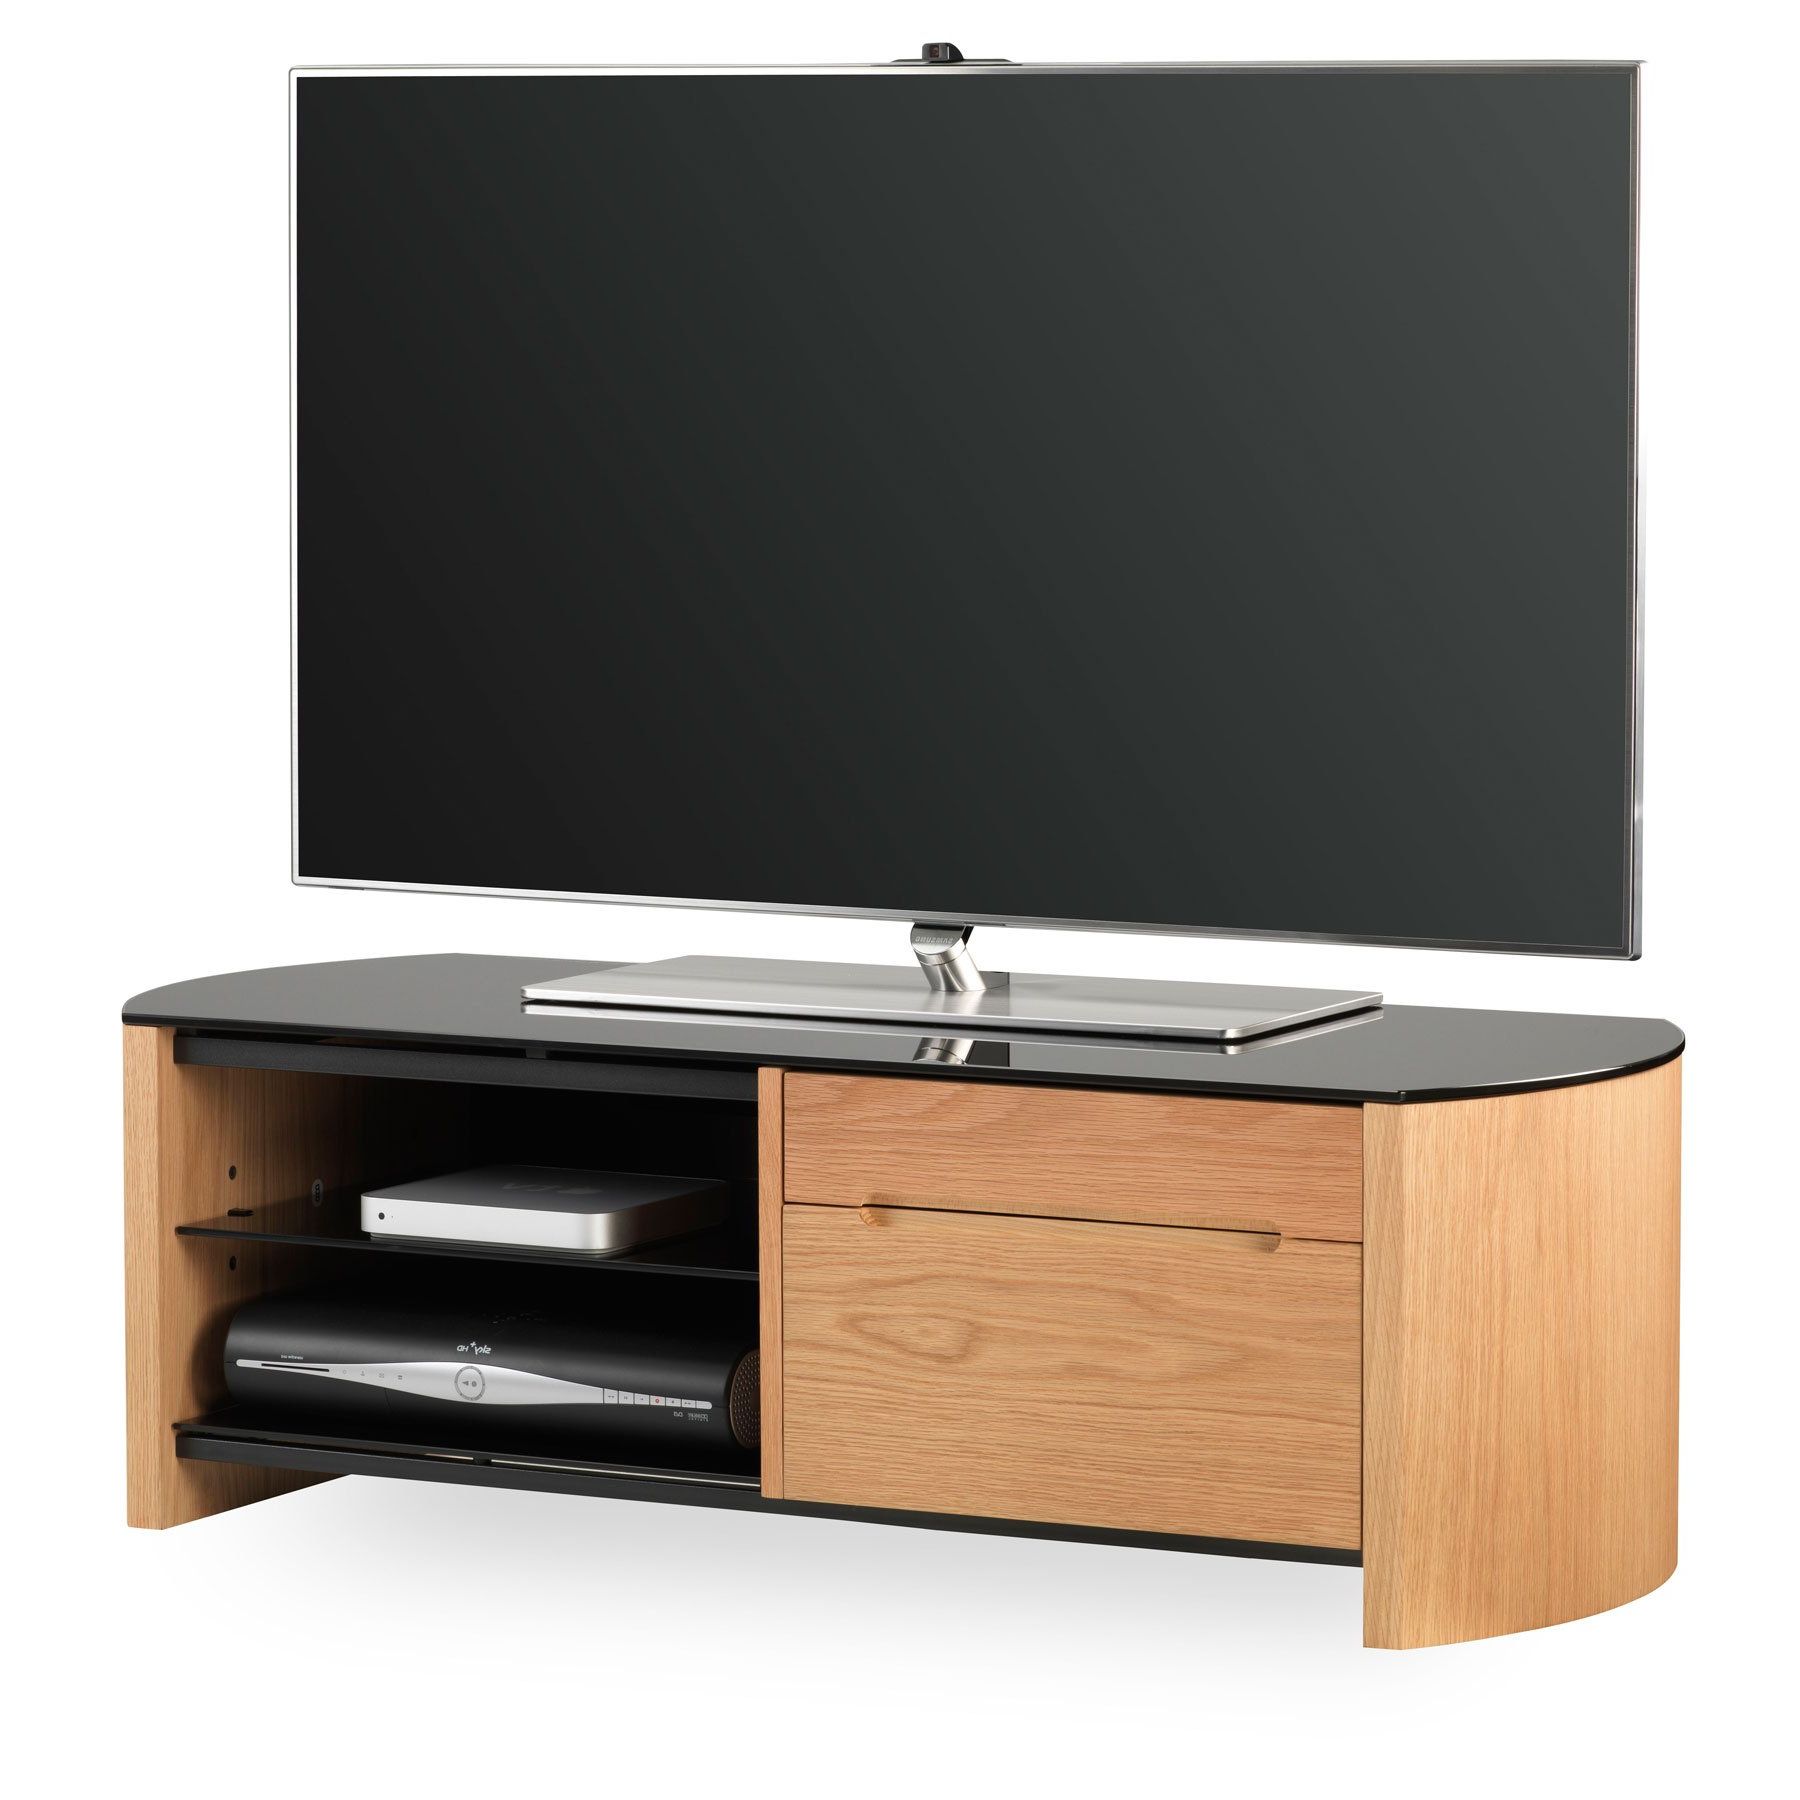 Alphason Finewood Fw1100cb Light Oak Tv Stand For Up To 50 In Colleen Tv Stands For Tvs Up To 50" (Gallery 6 of 20)